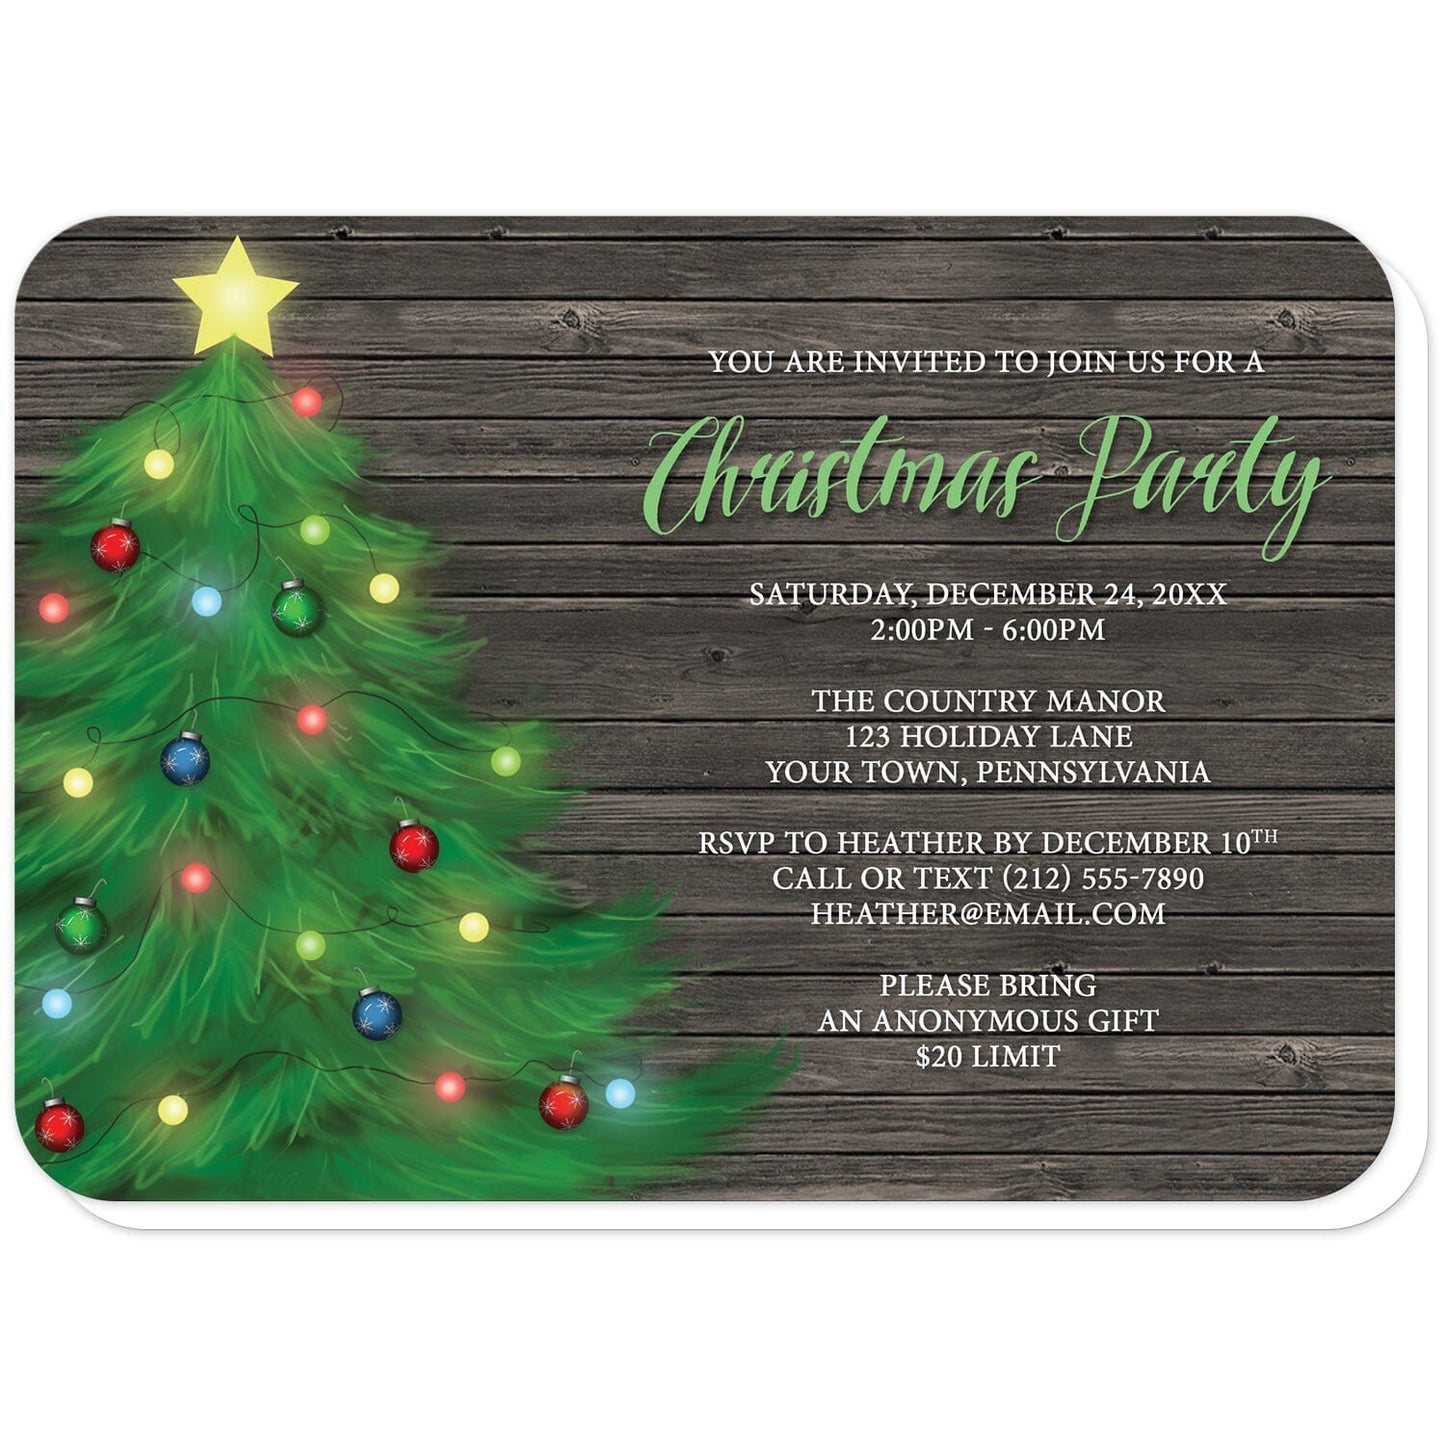 Rustic Wood Holiday Tree Christmas Party Invitations (with rounded corners) at Artistically Invited. Uniquely-illustrated rustic wood holiday tree Christmas party invitations with a whimsical holiday tree illustration on the lefts side featuring lights and ornaments and topped with a yellow star. Your personalized Christmas party details are custom printed in a green script font for your celebration title and an all-capital letters white font for the remaining details over a rustic wood background. 